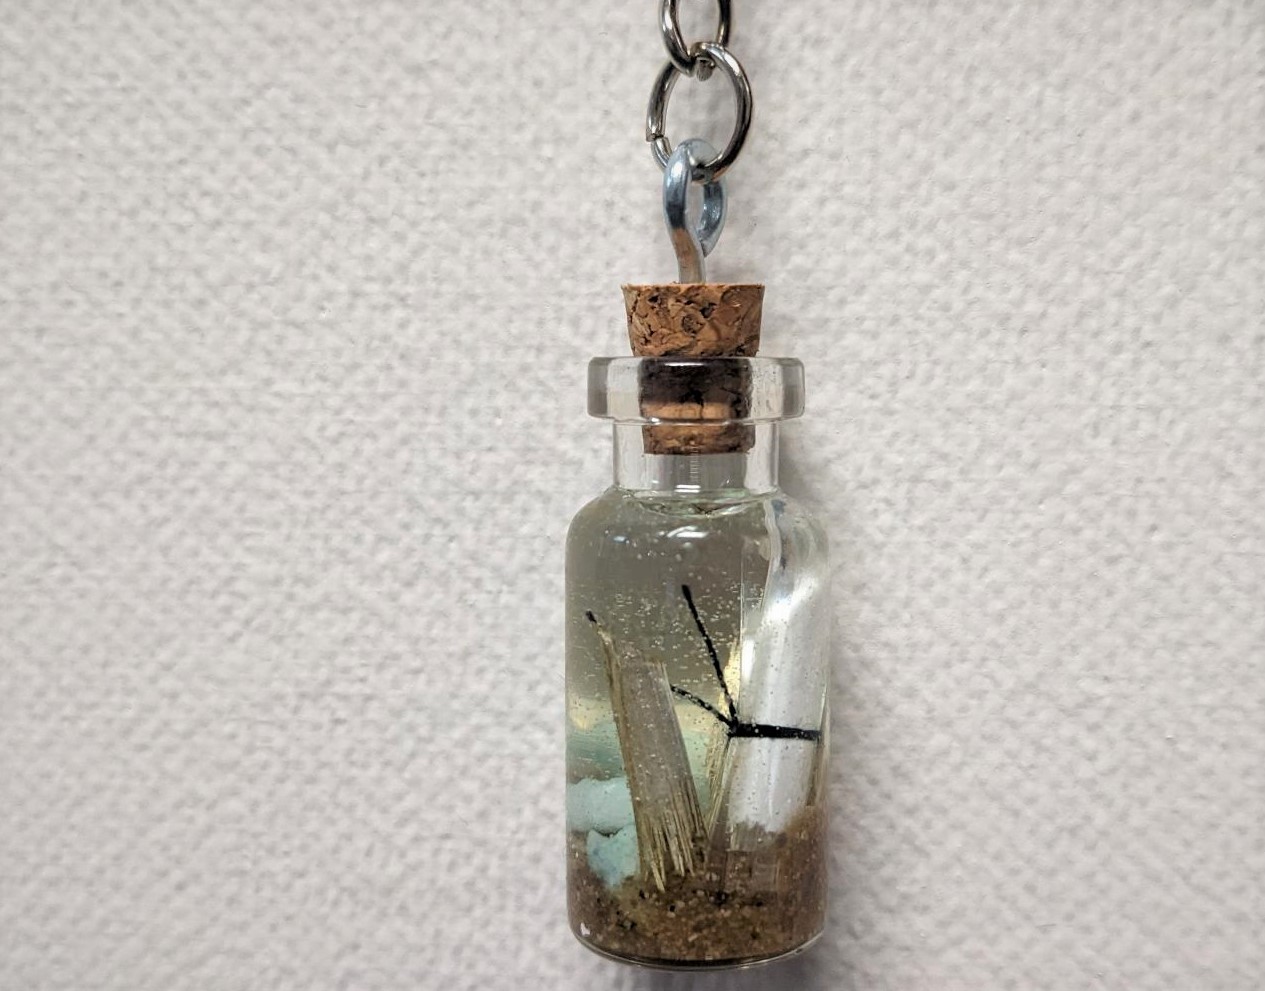 tiny corked bottle with message, sand, gravel, and plant piece